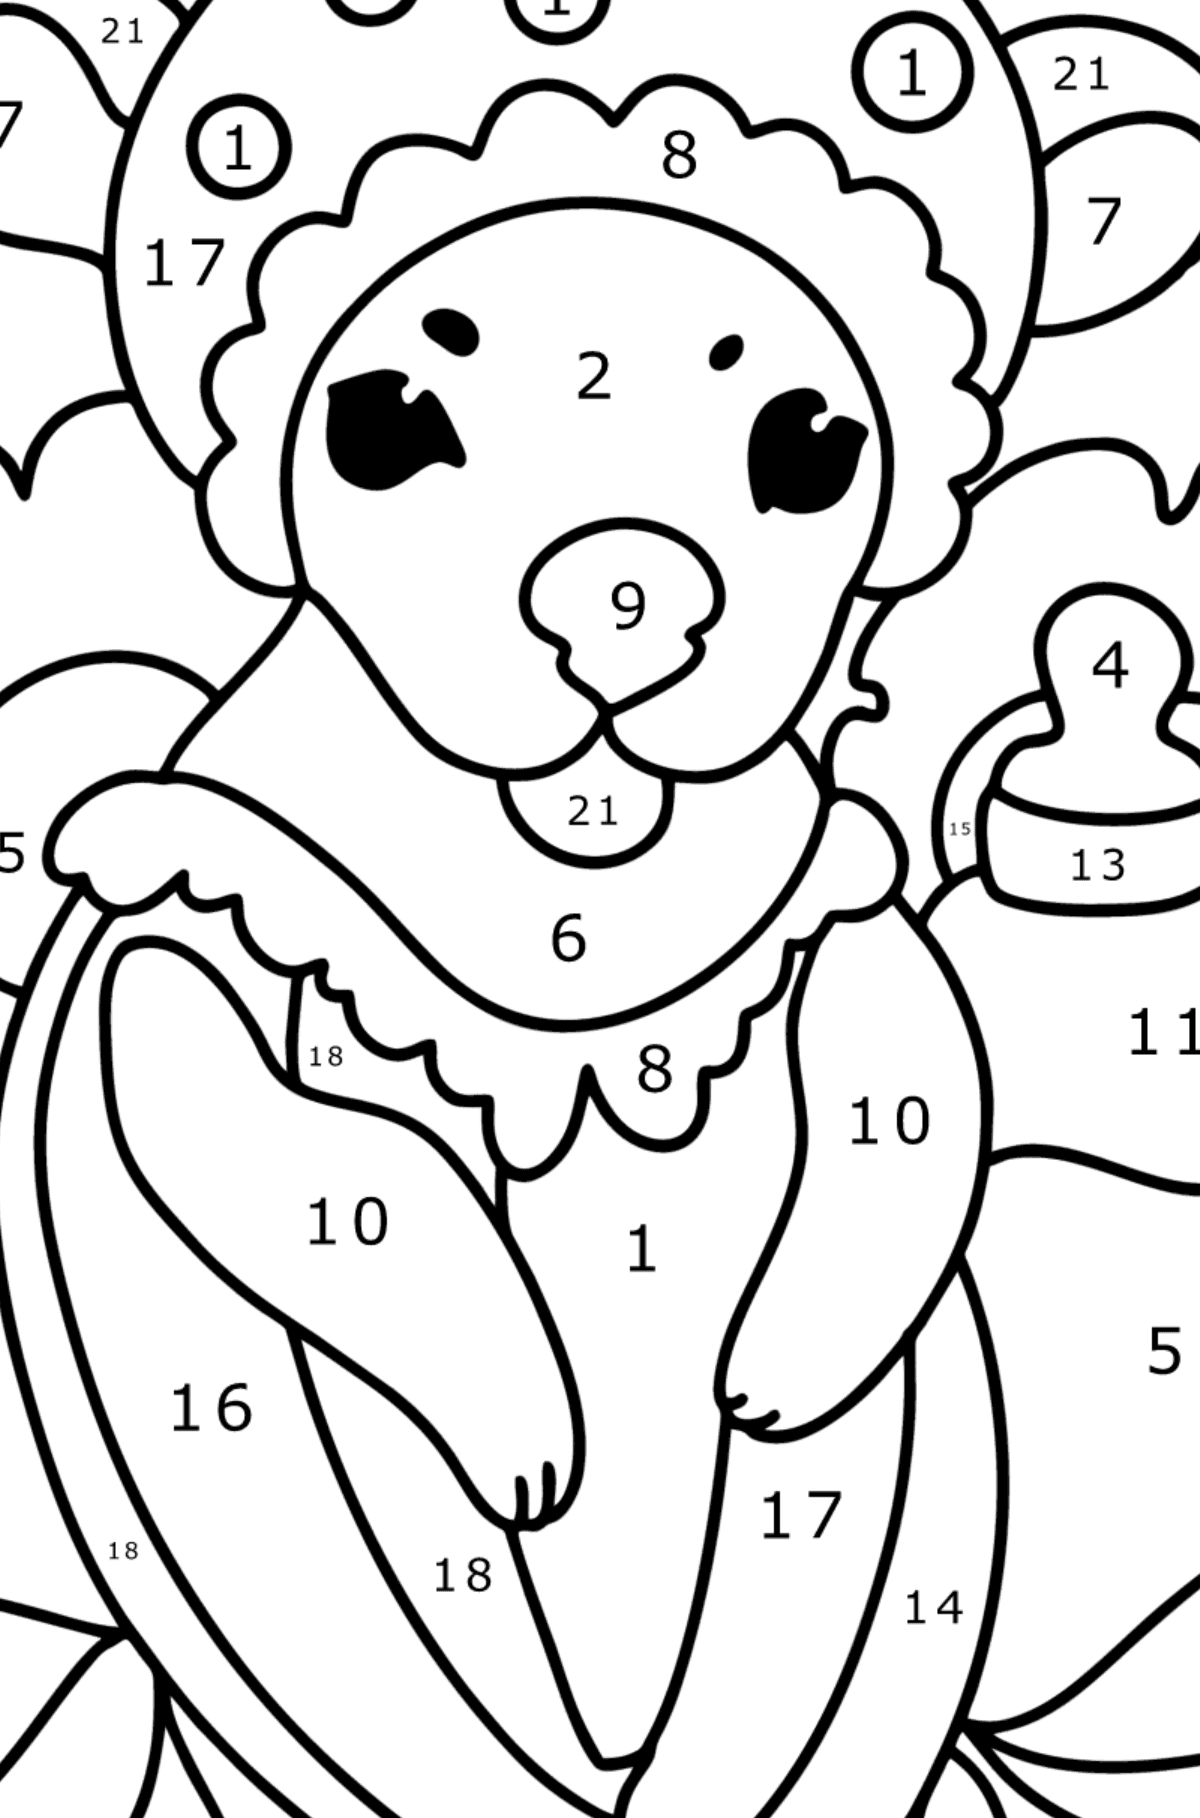 Complex Coloring page - Cartoon Baby Kangaroo - Coloring by Numbers for Kids